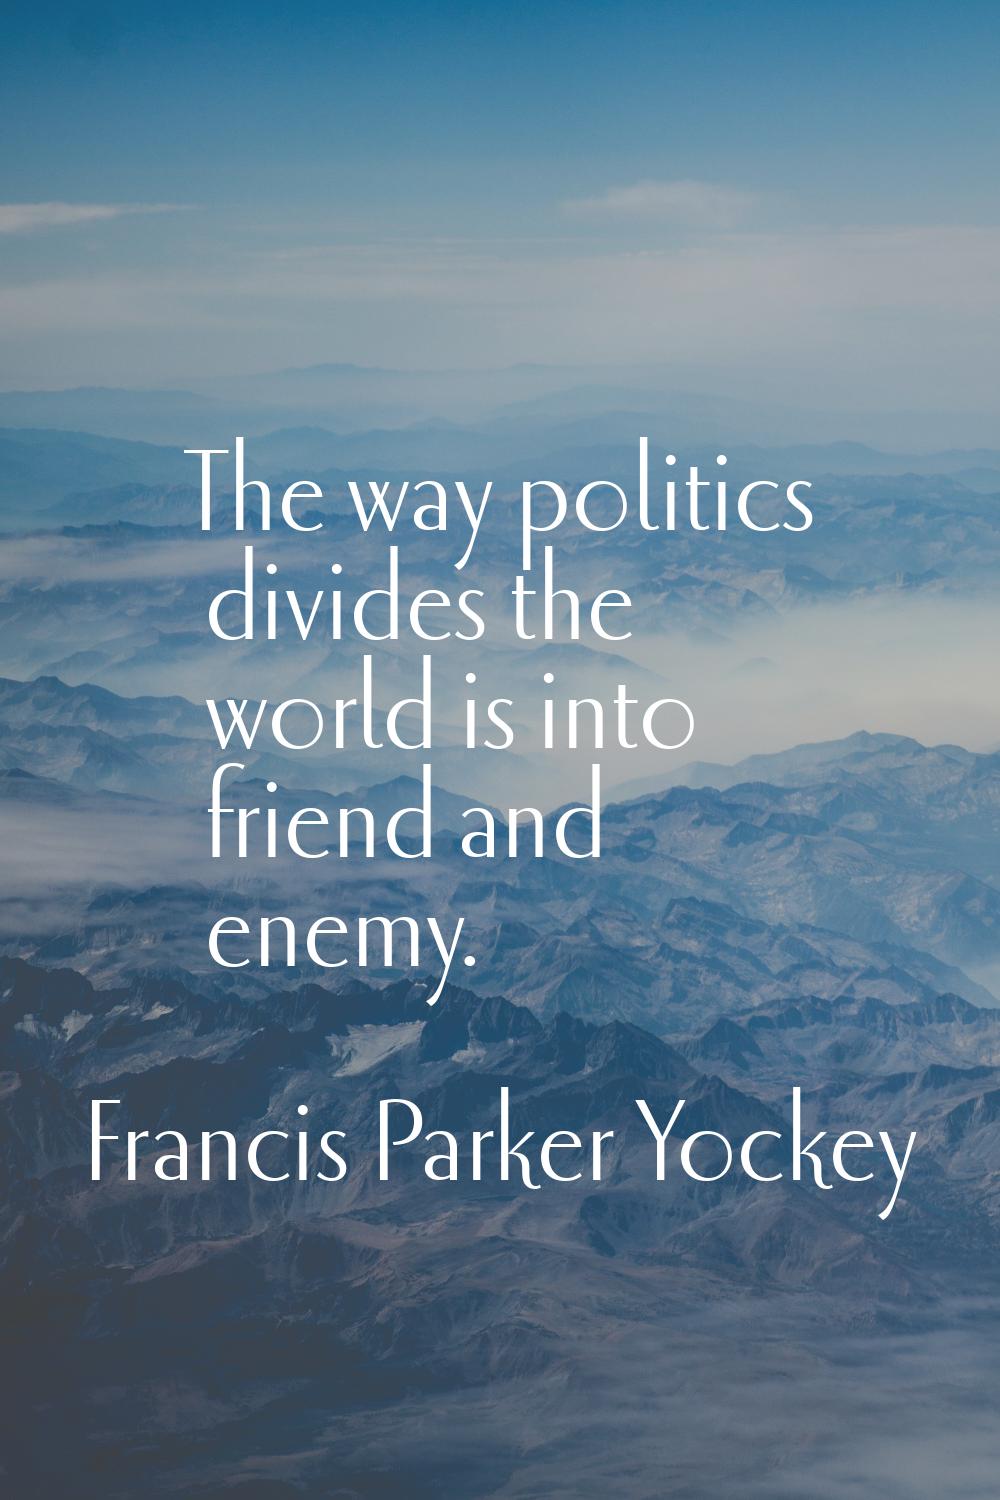 The way politics divides the world is into friend and enemy.